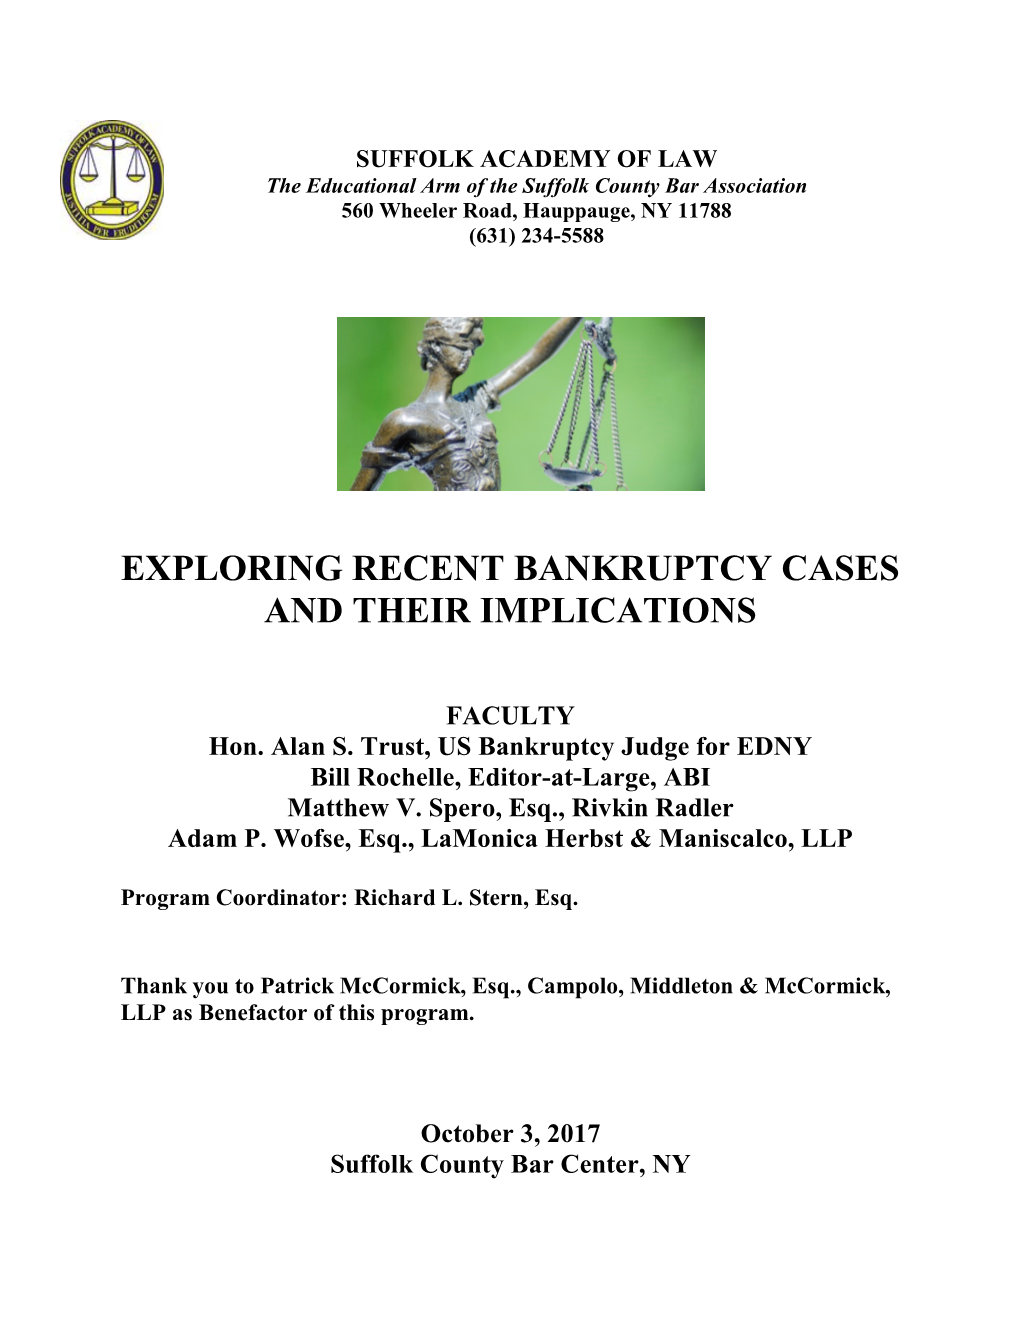 Exploring Bankruptcy Cases 2017